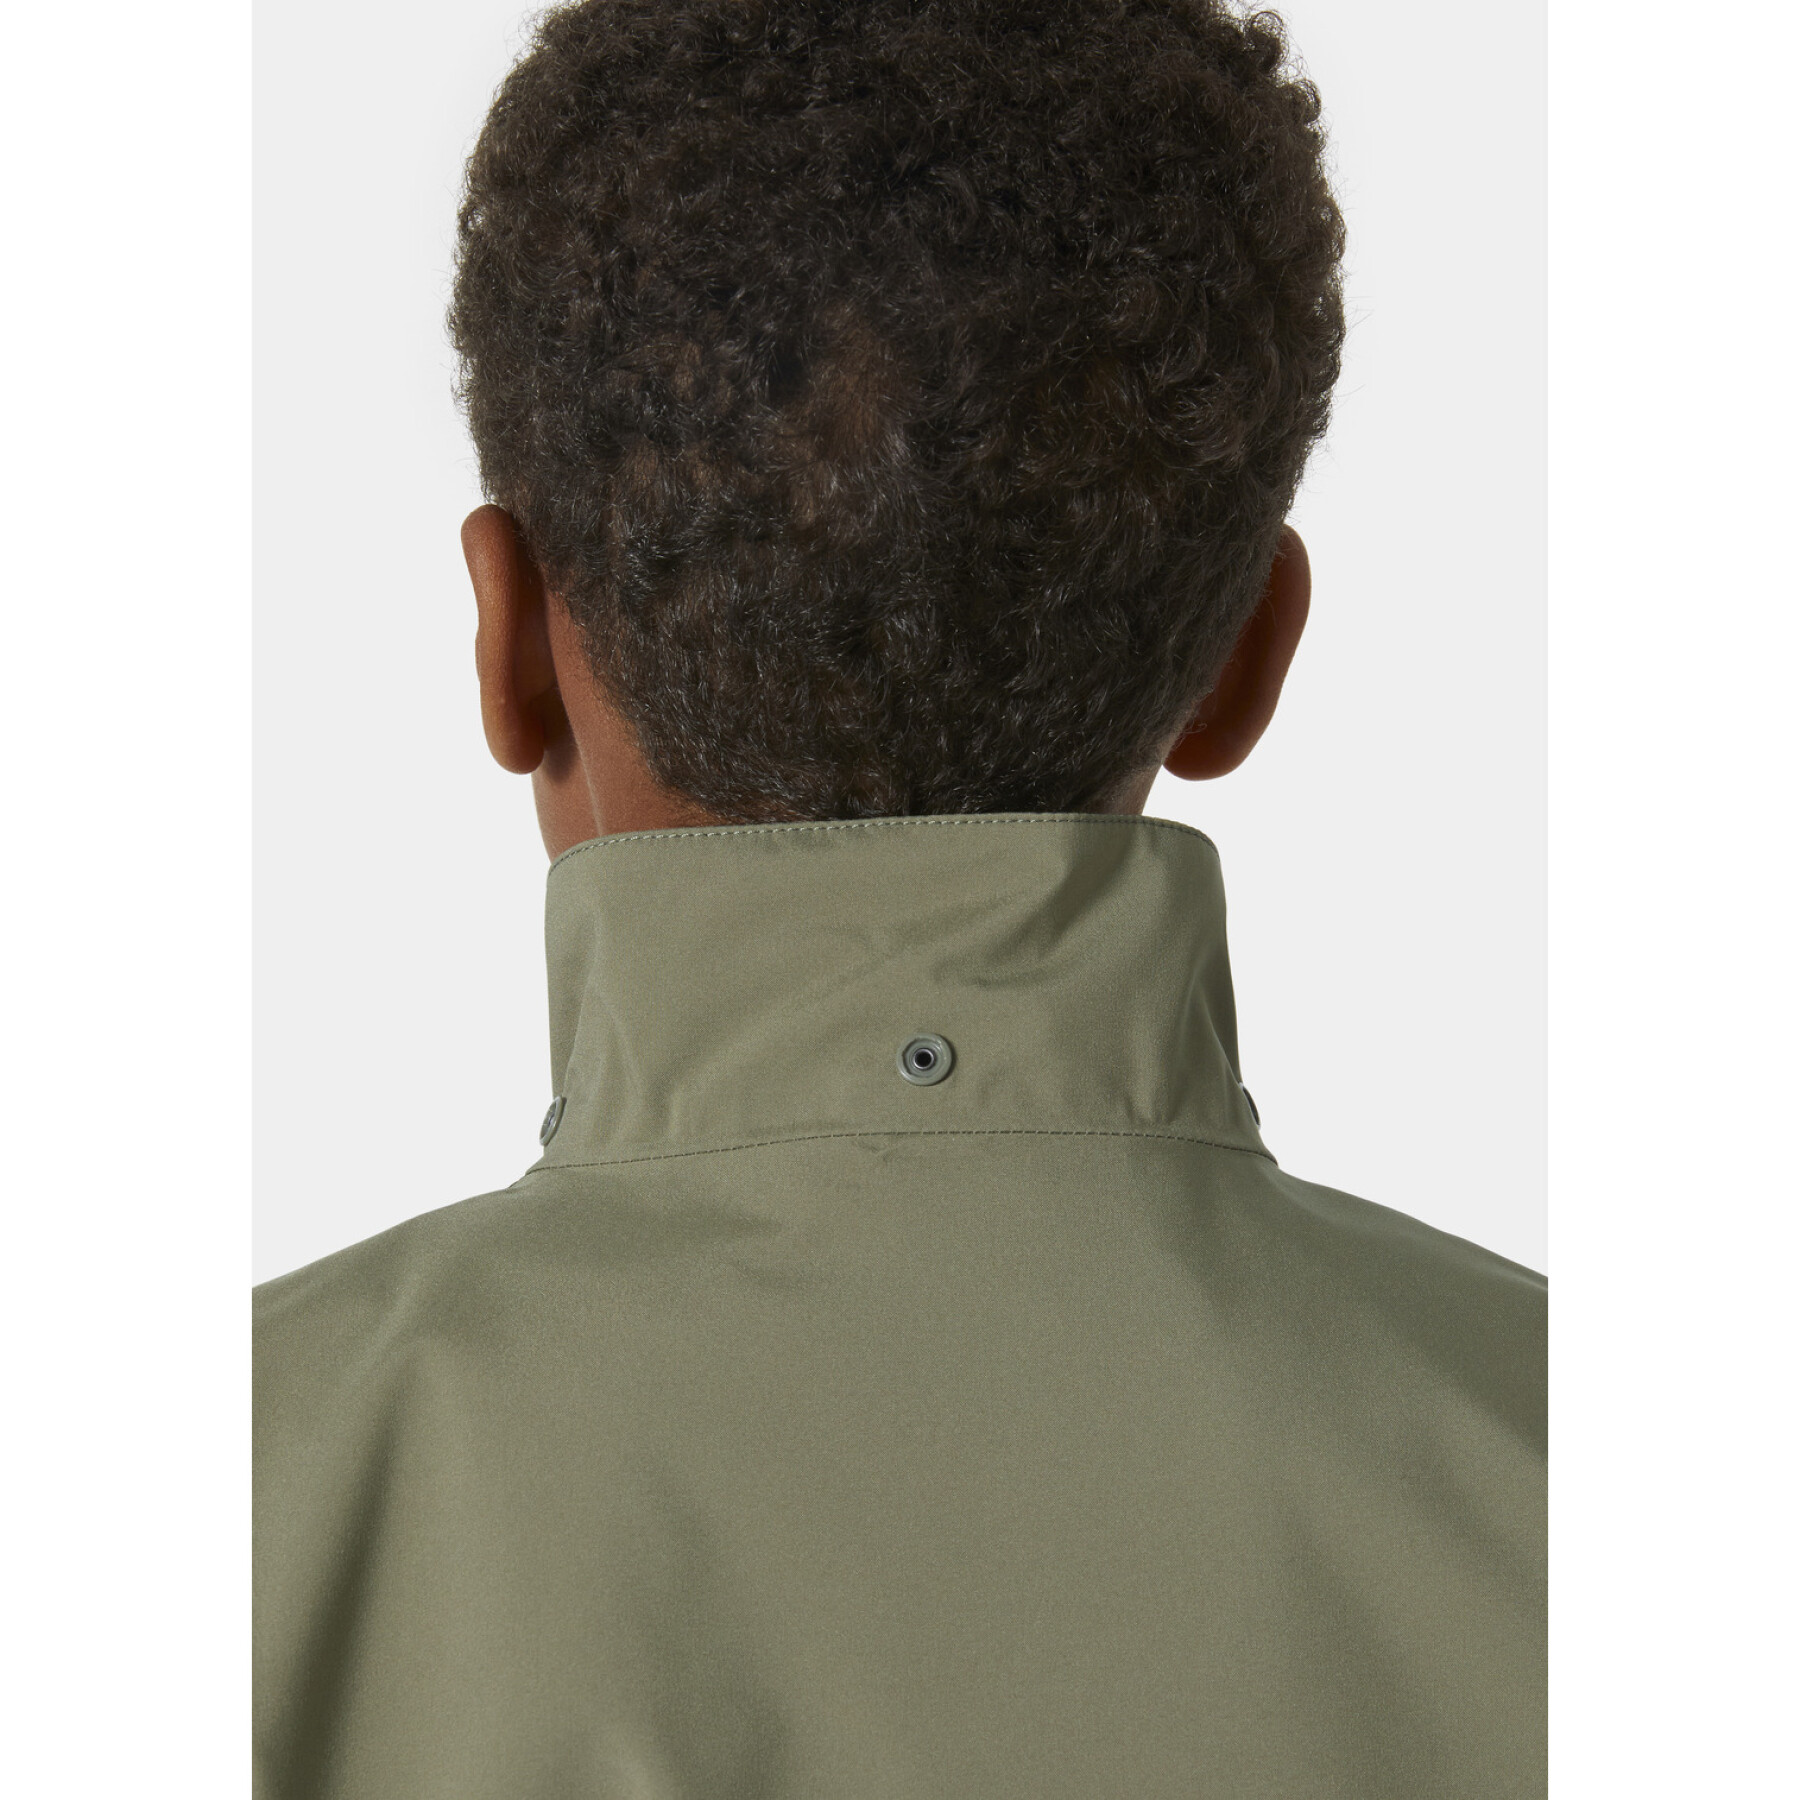 Chaqueta impermeable infantil Helly Hansen Rigging